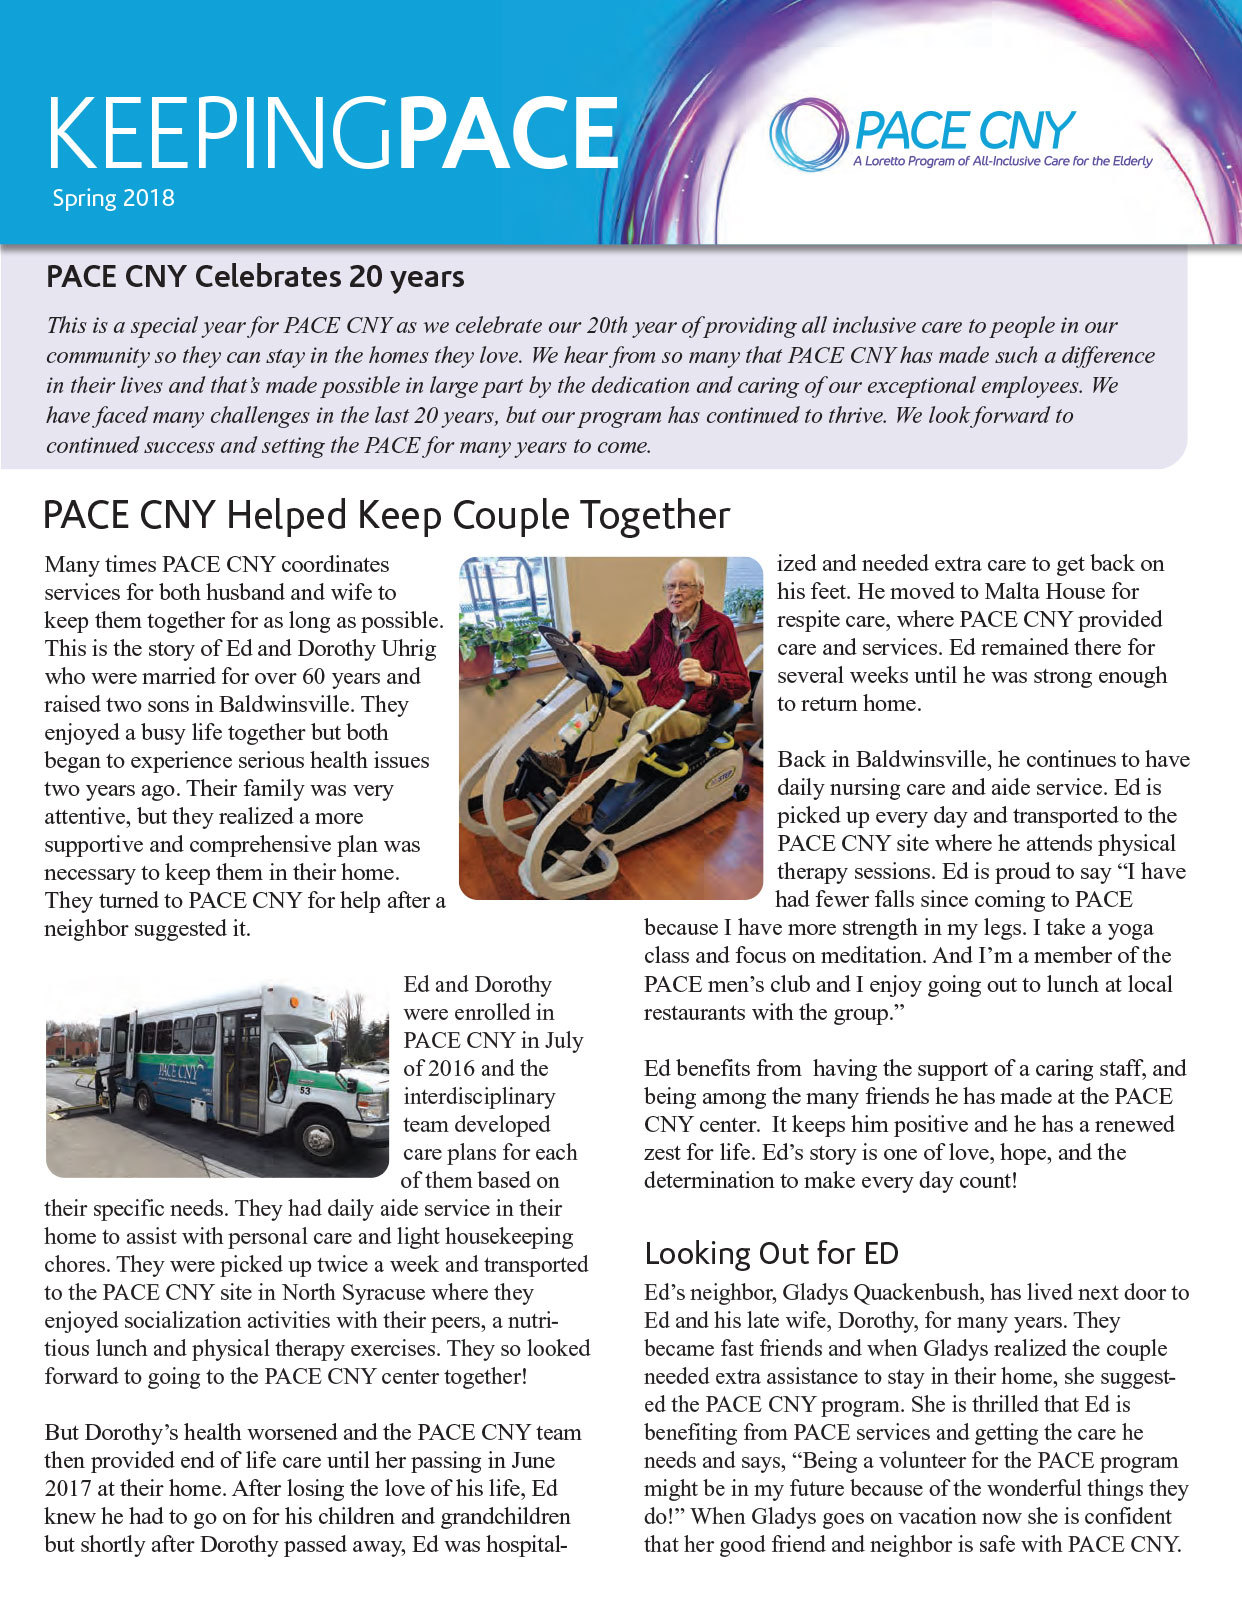 PACE CNY Newsletter, 2018, Page 1.